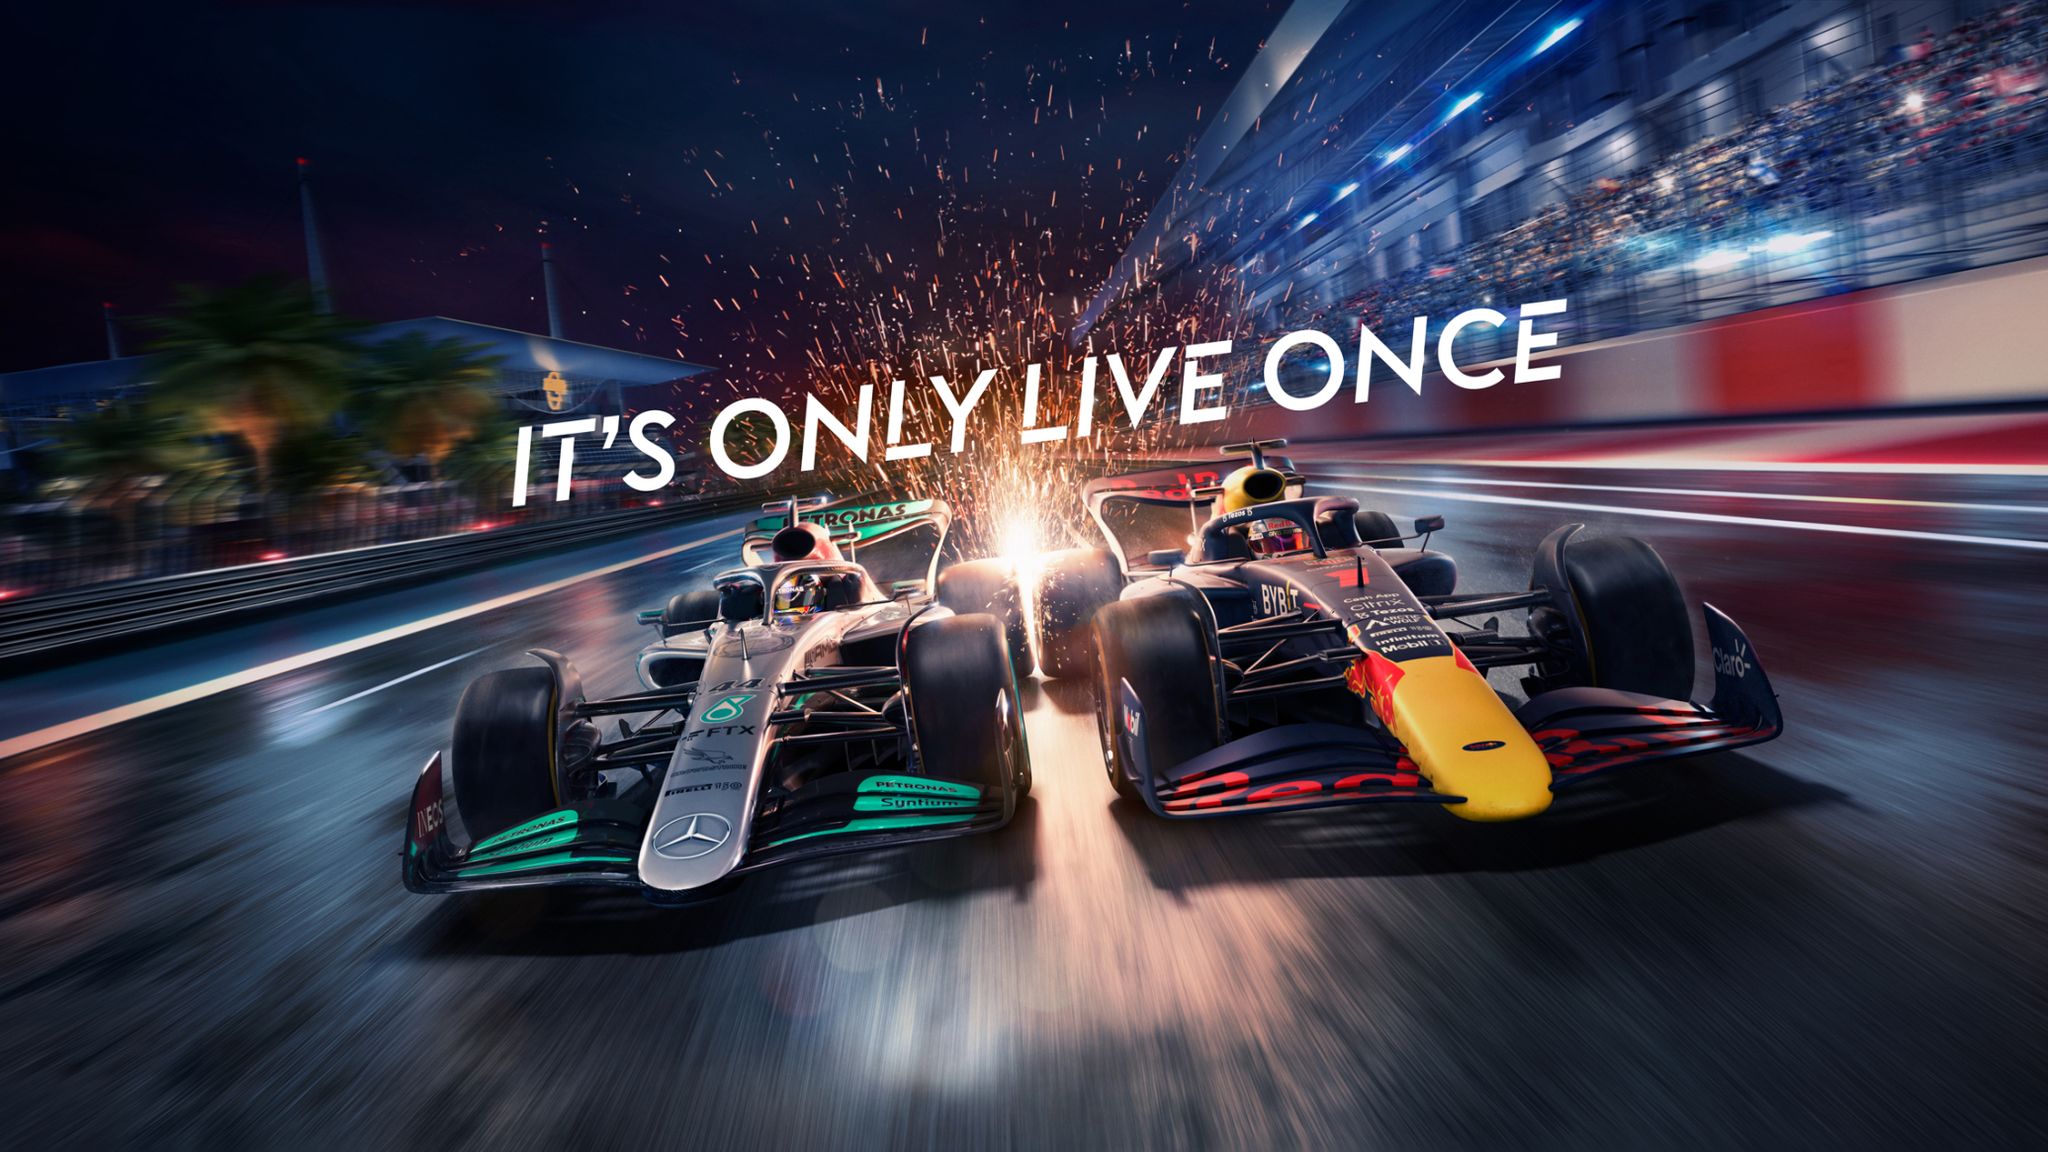 Formula 1 on Sky Sports set to be broadcast in High Dynamic Range (HDR) for the first time in its history